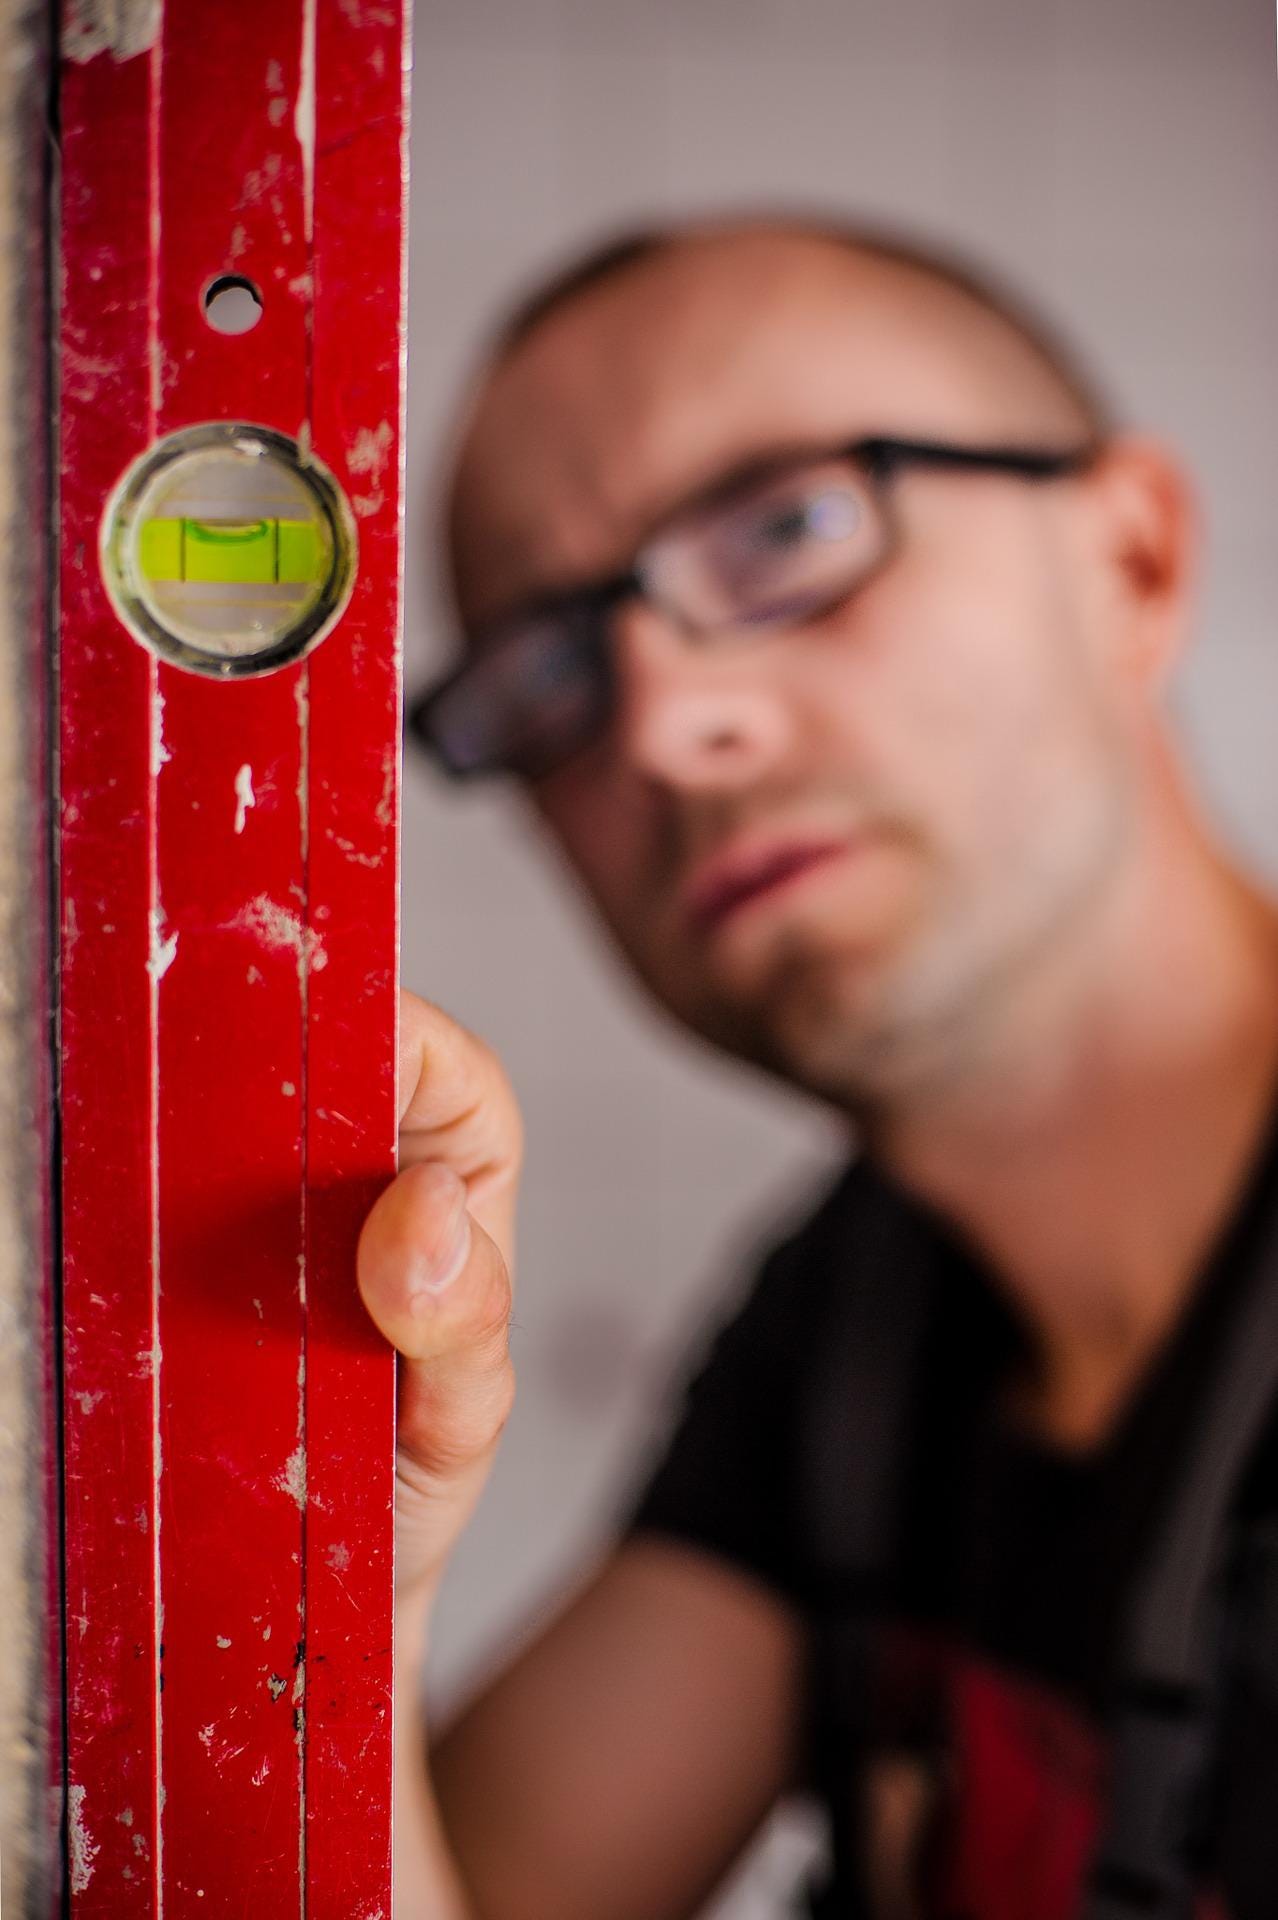 A man is measuring something with a level, which is bright red and clear in the foreground. The man's serious, bespectacled face is blurred in the background.